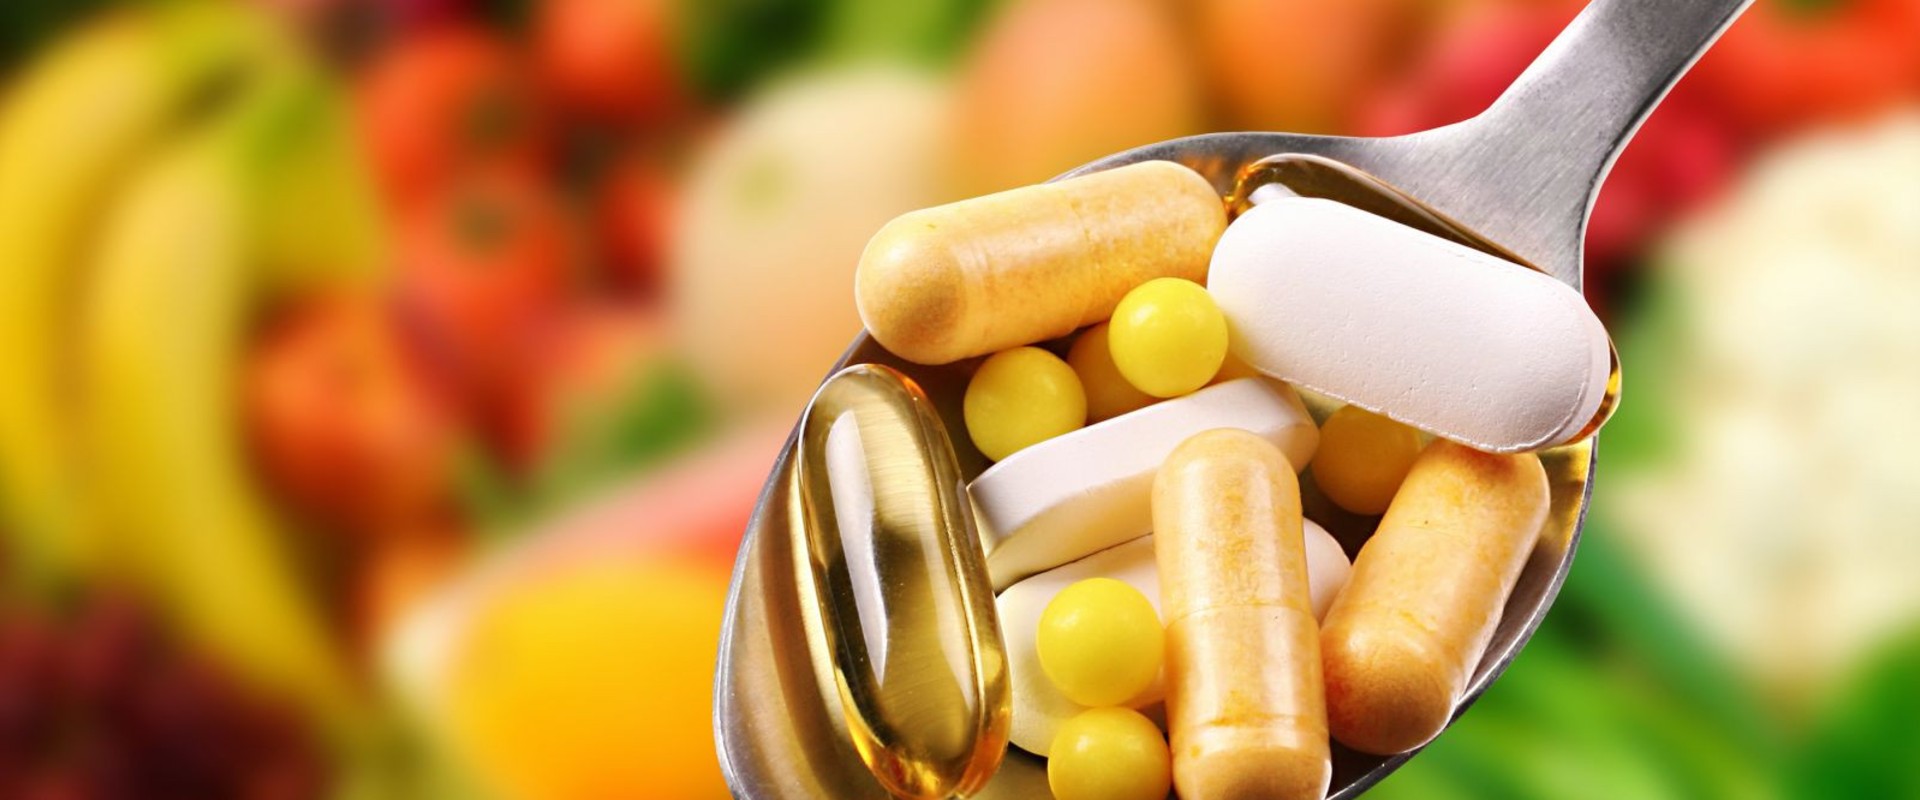 Do You Have to be a Certain Age to Buy Dietary Supplements? - An Expert's Perspective